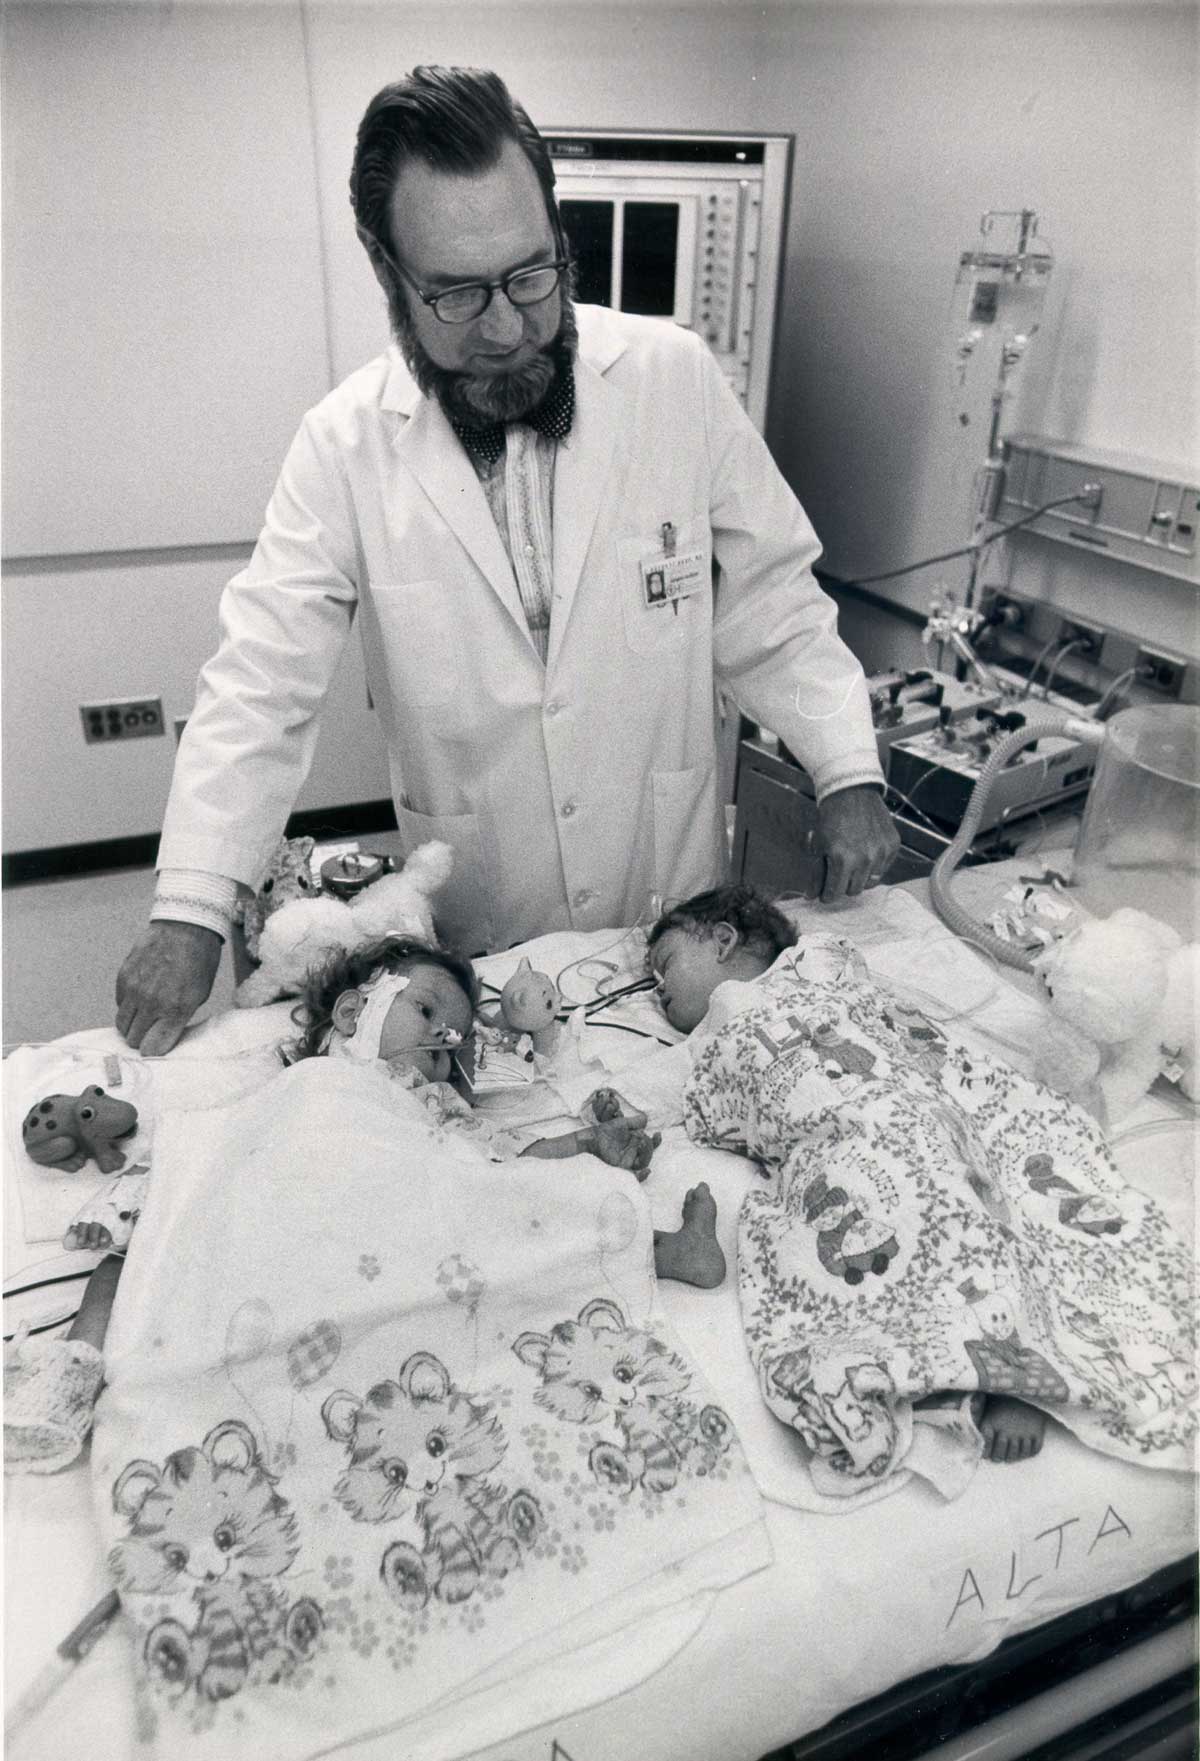 A black and white photograph of Koop in a lab coat by the twins lying under blankets.